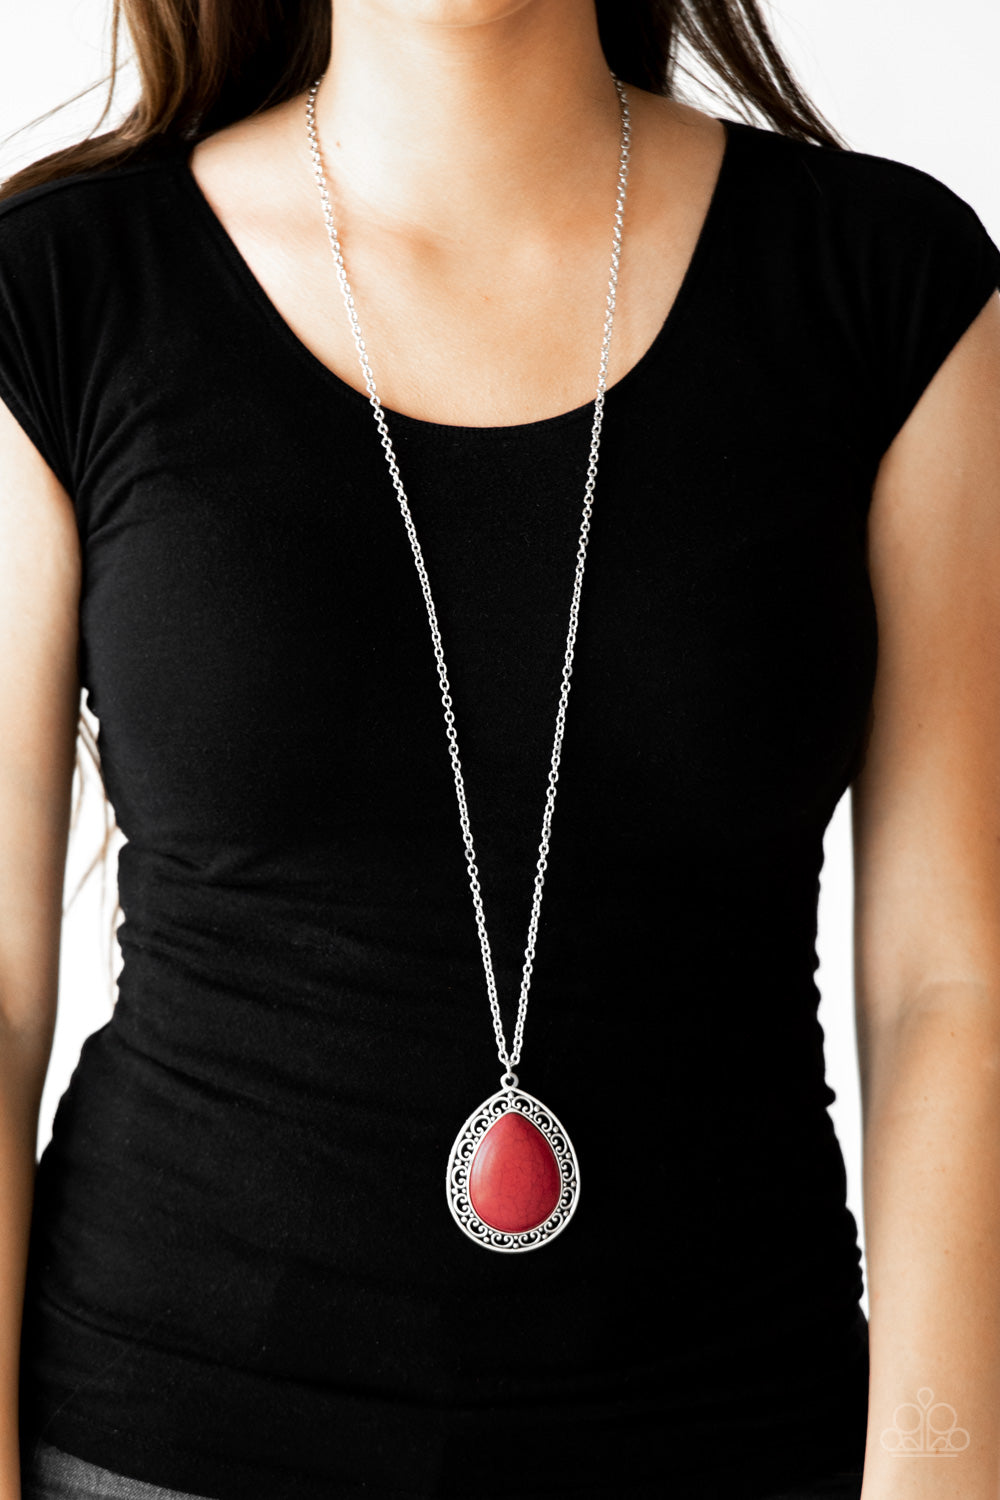 Paparazzi Full Frontier - Red - Stone Teardrop - Necklace and matching Earrings - $5 Jewelry with Ashley Swint